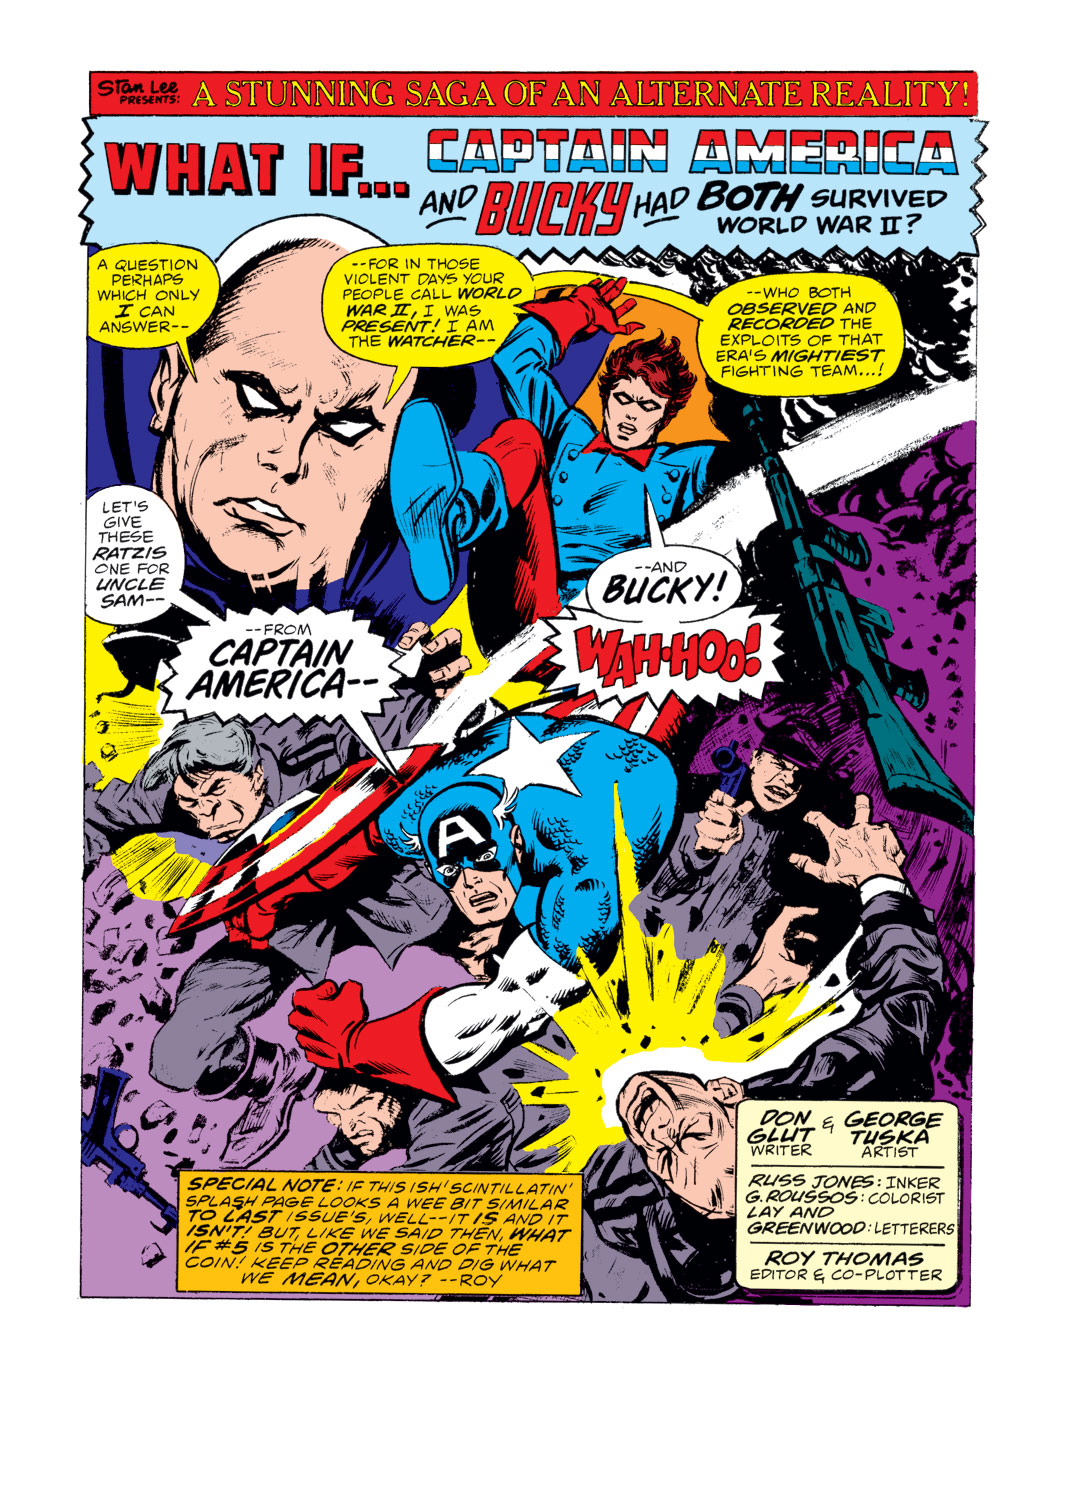 What If? (1977) Issue #5 - Captain America hadn't vanished during World War Two #5 - English 2